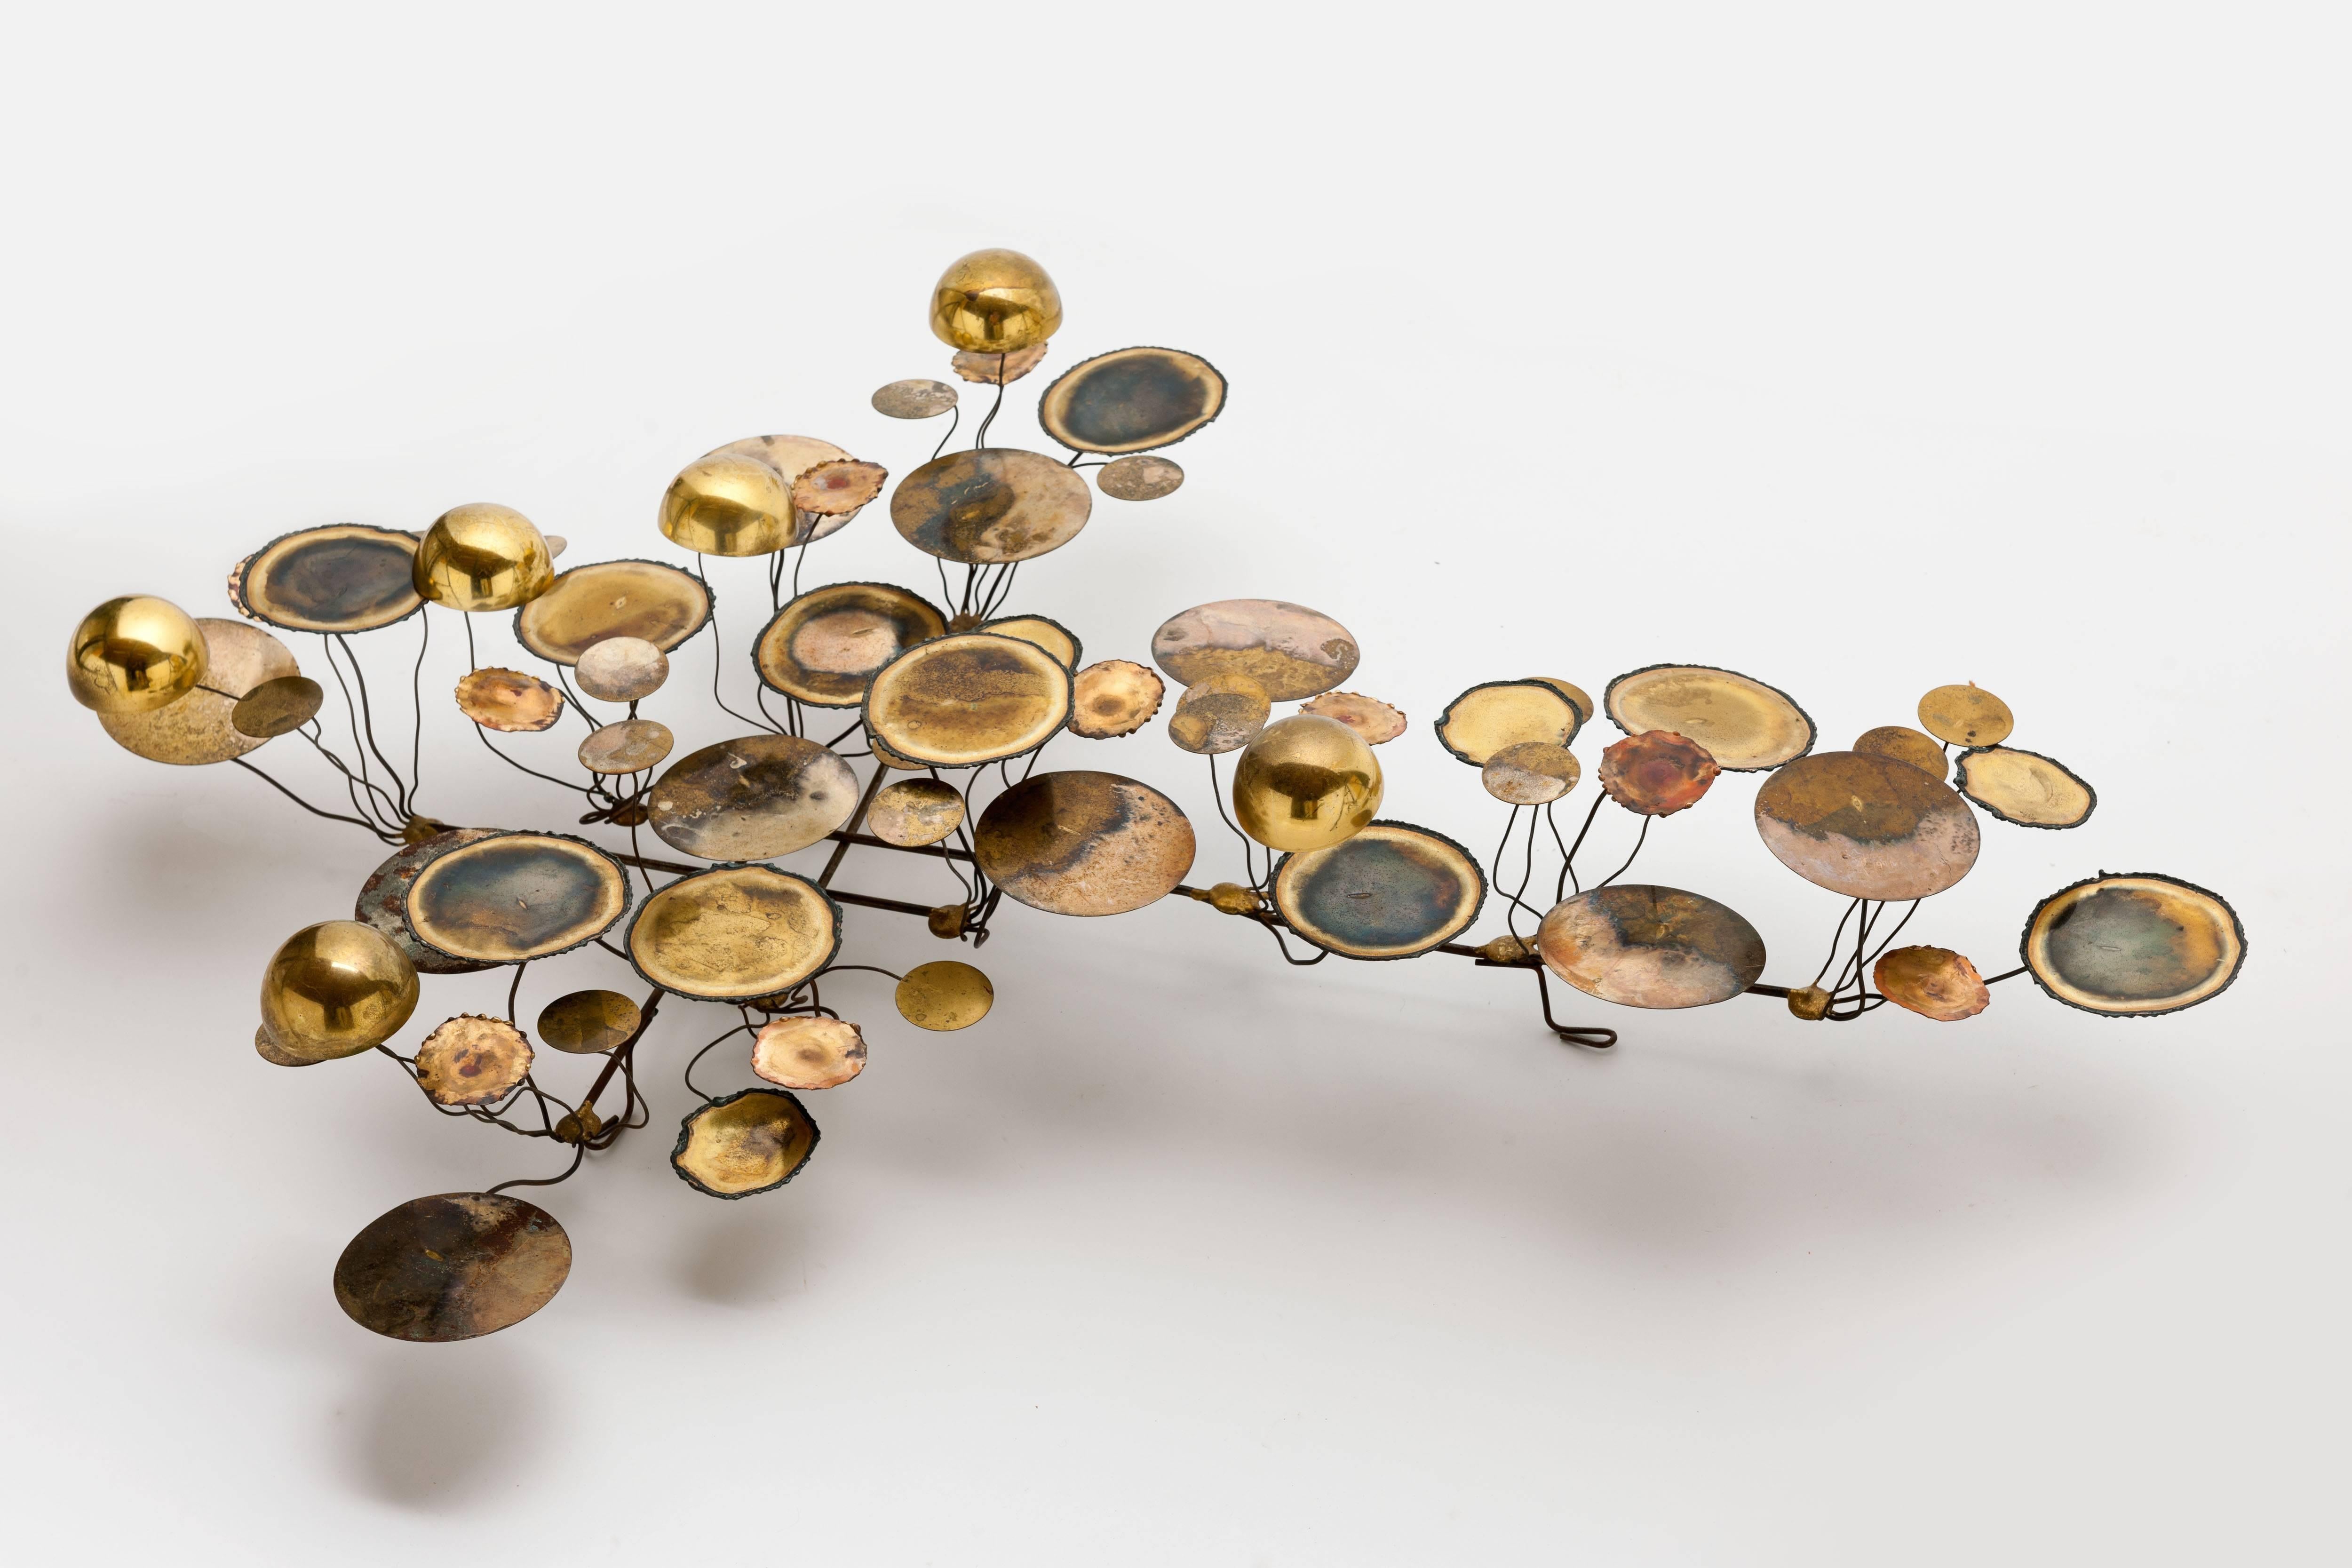 Iconic 'Raindrops' wall sculpture by Artisan House from late 1960s by Curtis Freiler & Jerry Fels.
Edited rough and polished brass and steel.

Amazing decorative piece with unique patine from age.